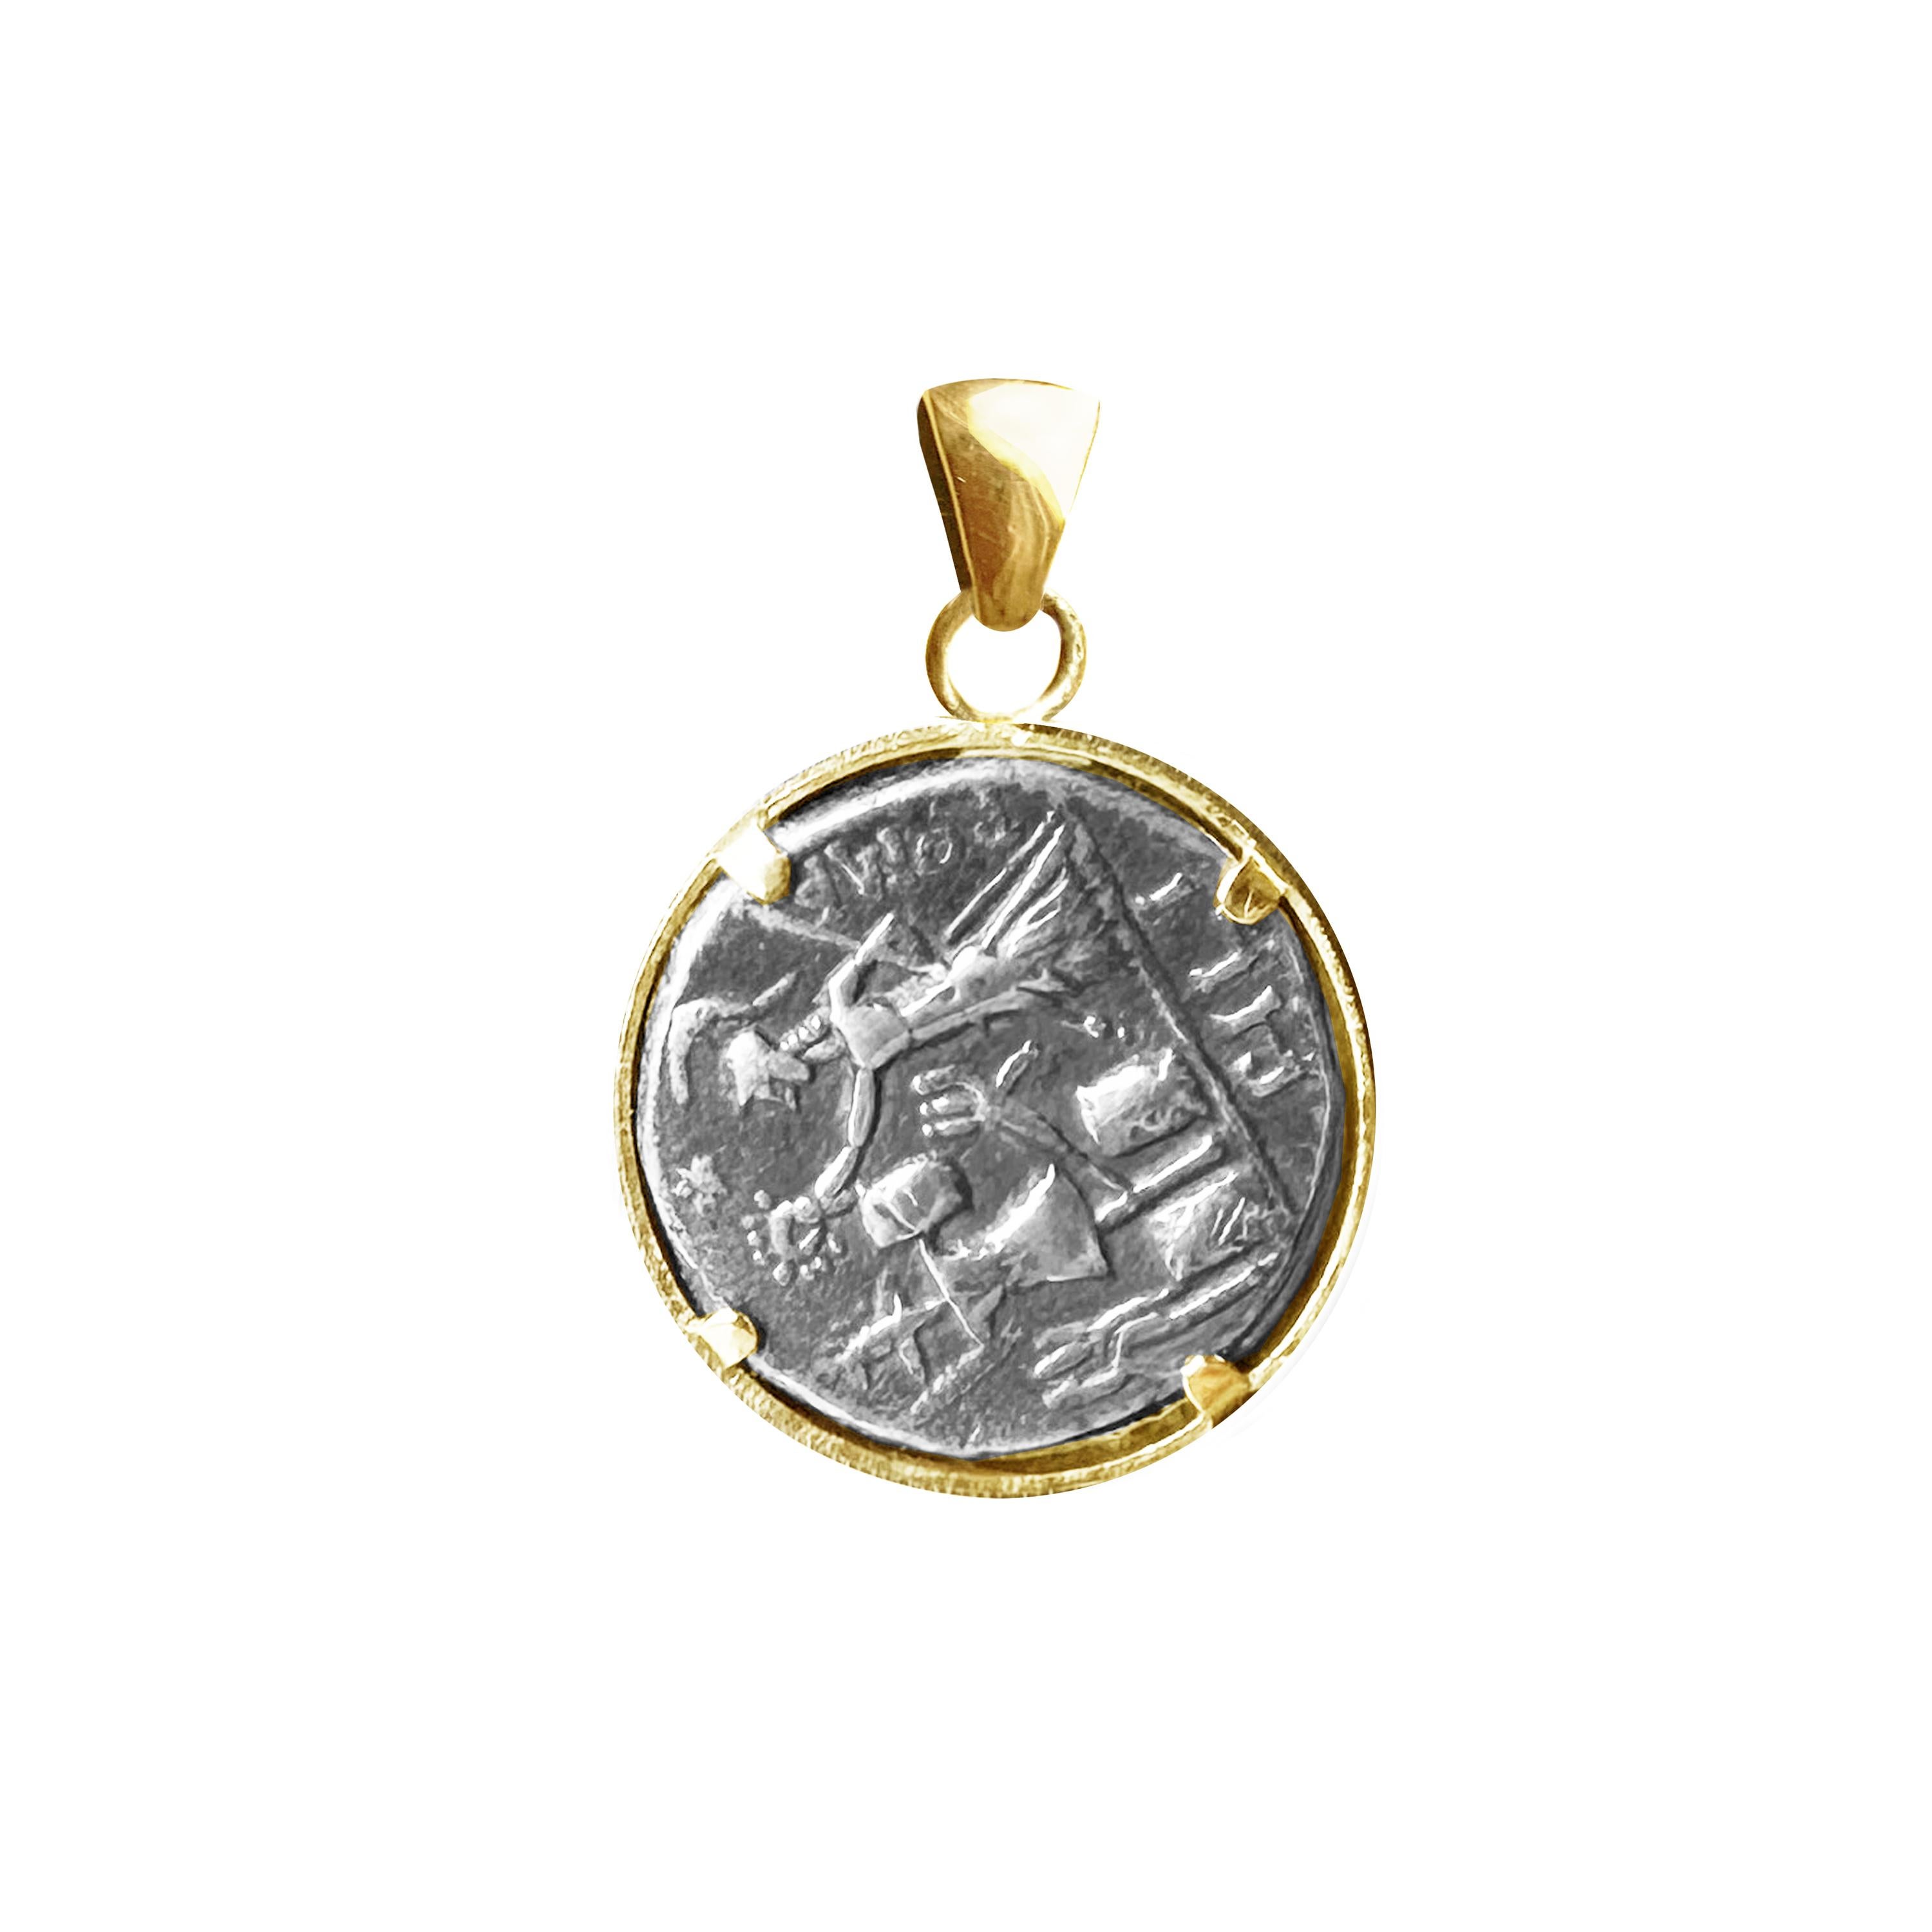 Classical Roman Authentic Roman Silver Coin 18 Kt Gold Pendant depicting Two-faced God Janus For Sale